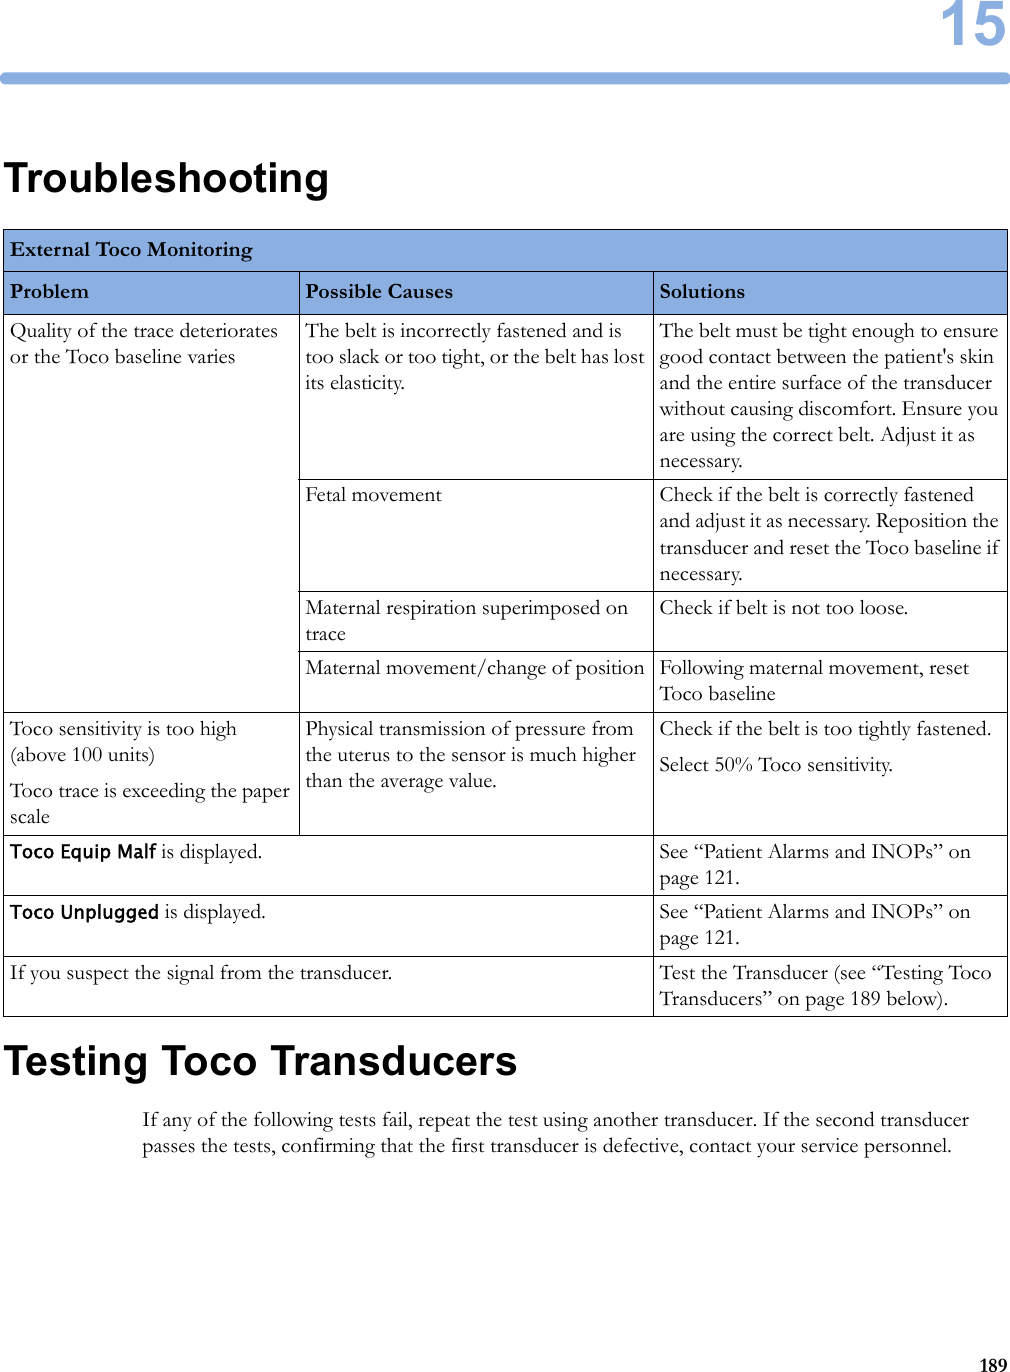 15189TroubleshootingTesting Toco TransducersIf any of the following tests fail, repeat the test using another transducer. If the second transducer passes the tests, confirming that the first transducer is defective, contact your service personnel.External Toco MonitoringProblem Possible Causes SolutionsQuality of the trace deteriorates or the Toco baseline variesThe belt is incorrectly fastened and is too slack or too tight, or the belt has lost its elasticity.The belt must be tight enough to ensure good contact between the patient&apos;s skin and the entire surface of the transducer without causing discomfort. Ensure you are using the correct belt. Adjust it as necessary.Fetal movement Check if the belt is correctly fastened and adjust it as necessary. Reposition the transducer and reset the Toco baseline if necessary.Maternal respiration superimposed on traceCheck if belt is not too loose.Maternal movement/change of position Following maternal movement, reset Toco baselineToco sensitivity is too high (above 100 units)Toco trace is exceeding the paper scalePhysical transmission of pressure from the uterus to the sensor is much higher than the average value.Check if the belt is too tightly fastened.Select 50% Toco sensitivity.Toco Equip Malf is displayed. See “Patient Alarms and INOPs” on page 121.Toco Unplugged is displayed. See “Patient Alarms and INOPs” on page 121.If you suspect the signal from the transducer. Test the Transducer (see “Testing Toco Transducers” on page 189 below).